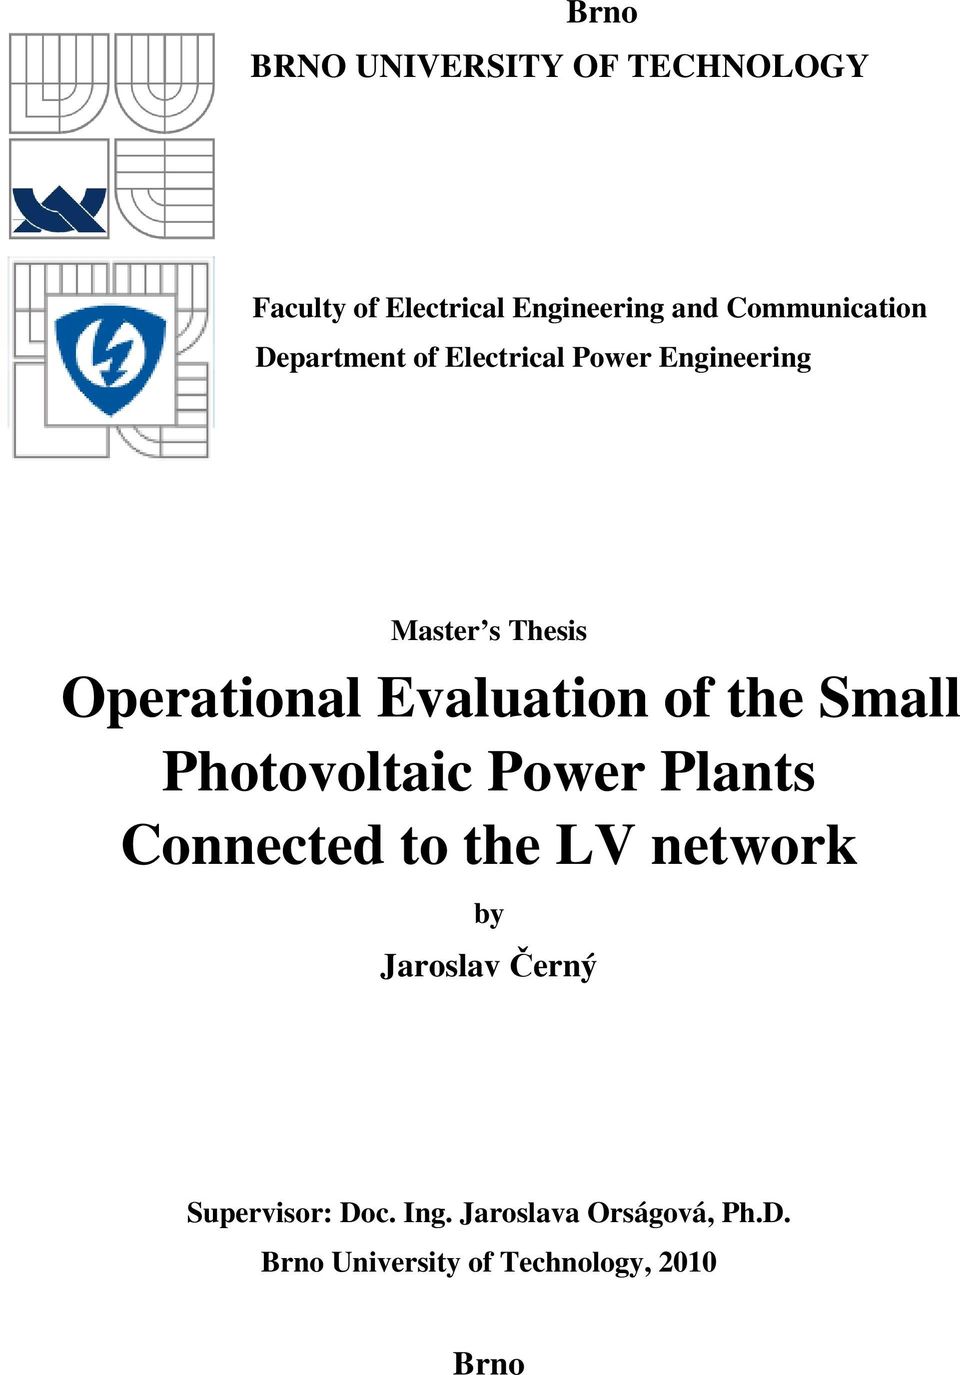 Evaluation of the Small Photovoltaic Power Plants Connected to the LV network by